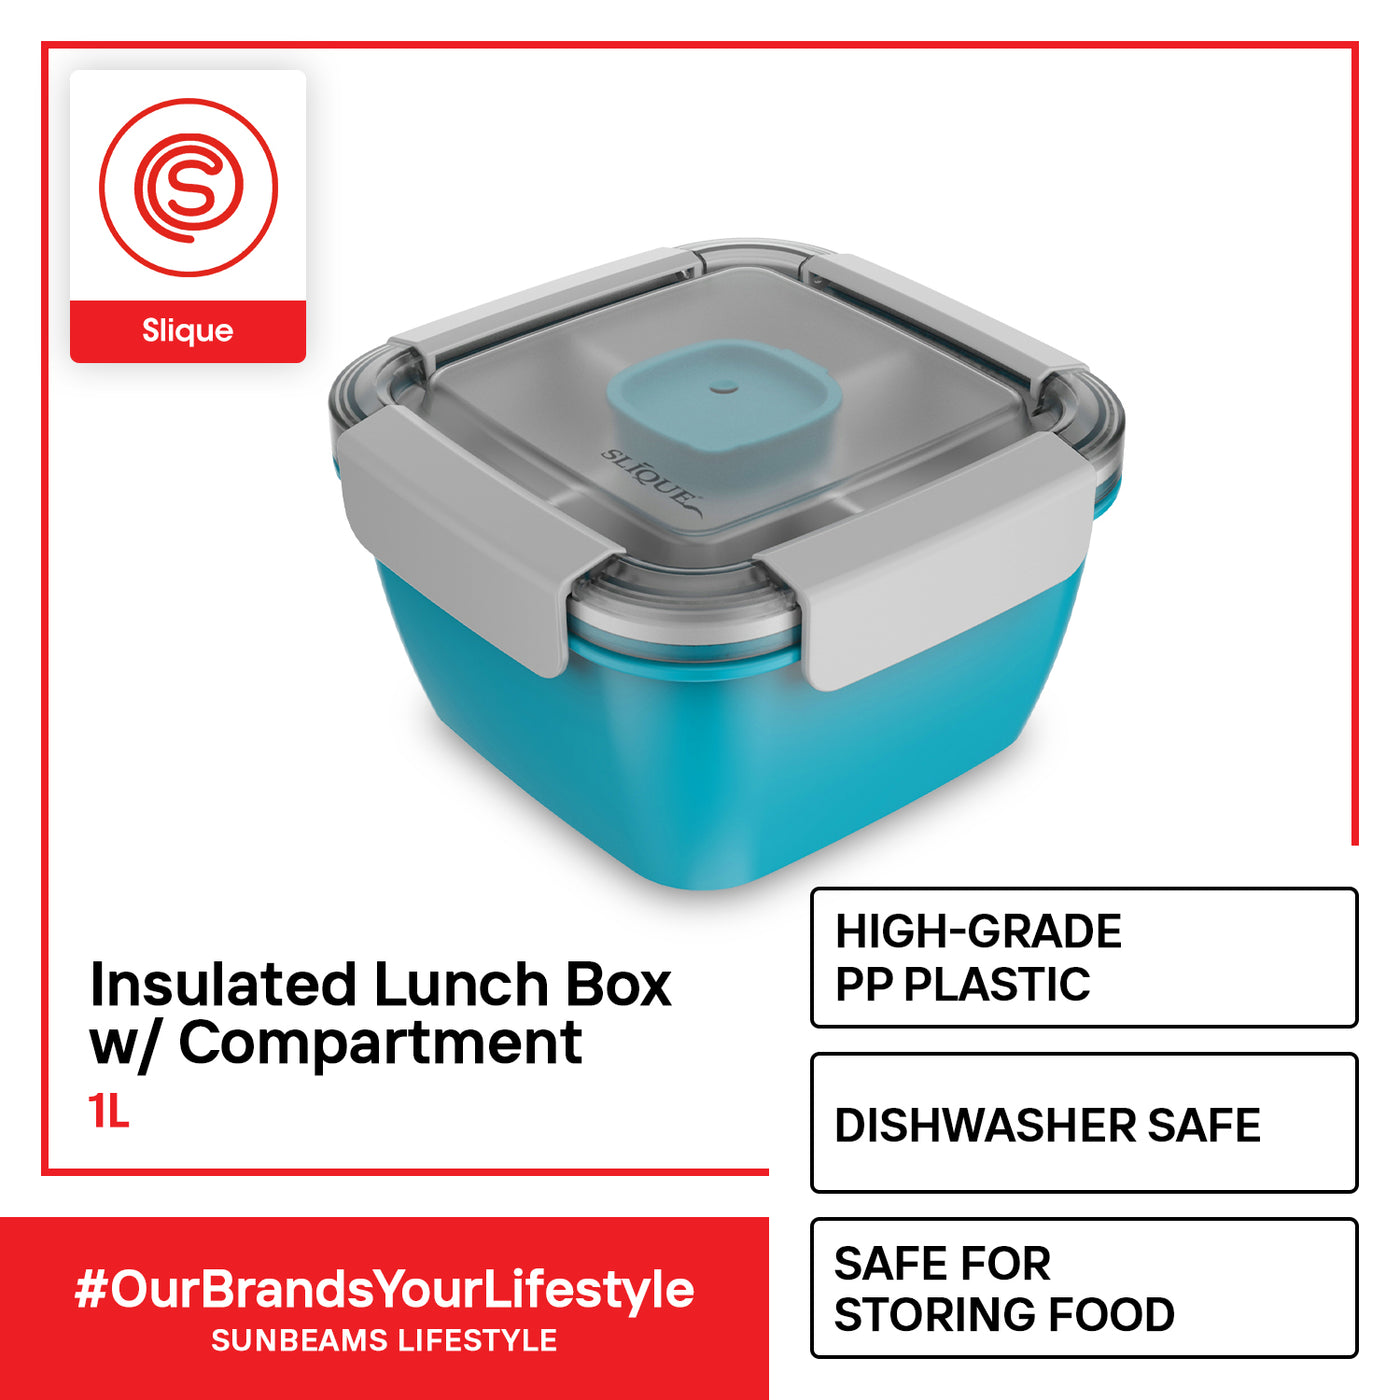 SLIQUE Premium Lunch Box w/ Compartments 1000ml1L BPA Free Airtight Microwave Safe Amazing Gift Idea For Any Occasion! (AquaGreen)